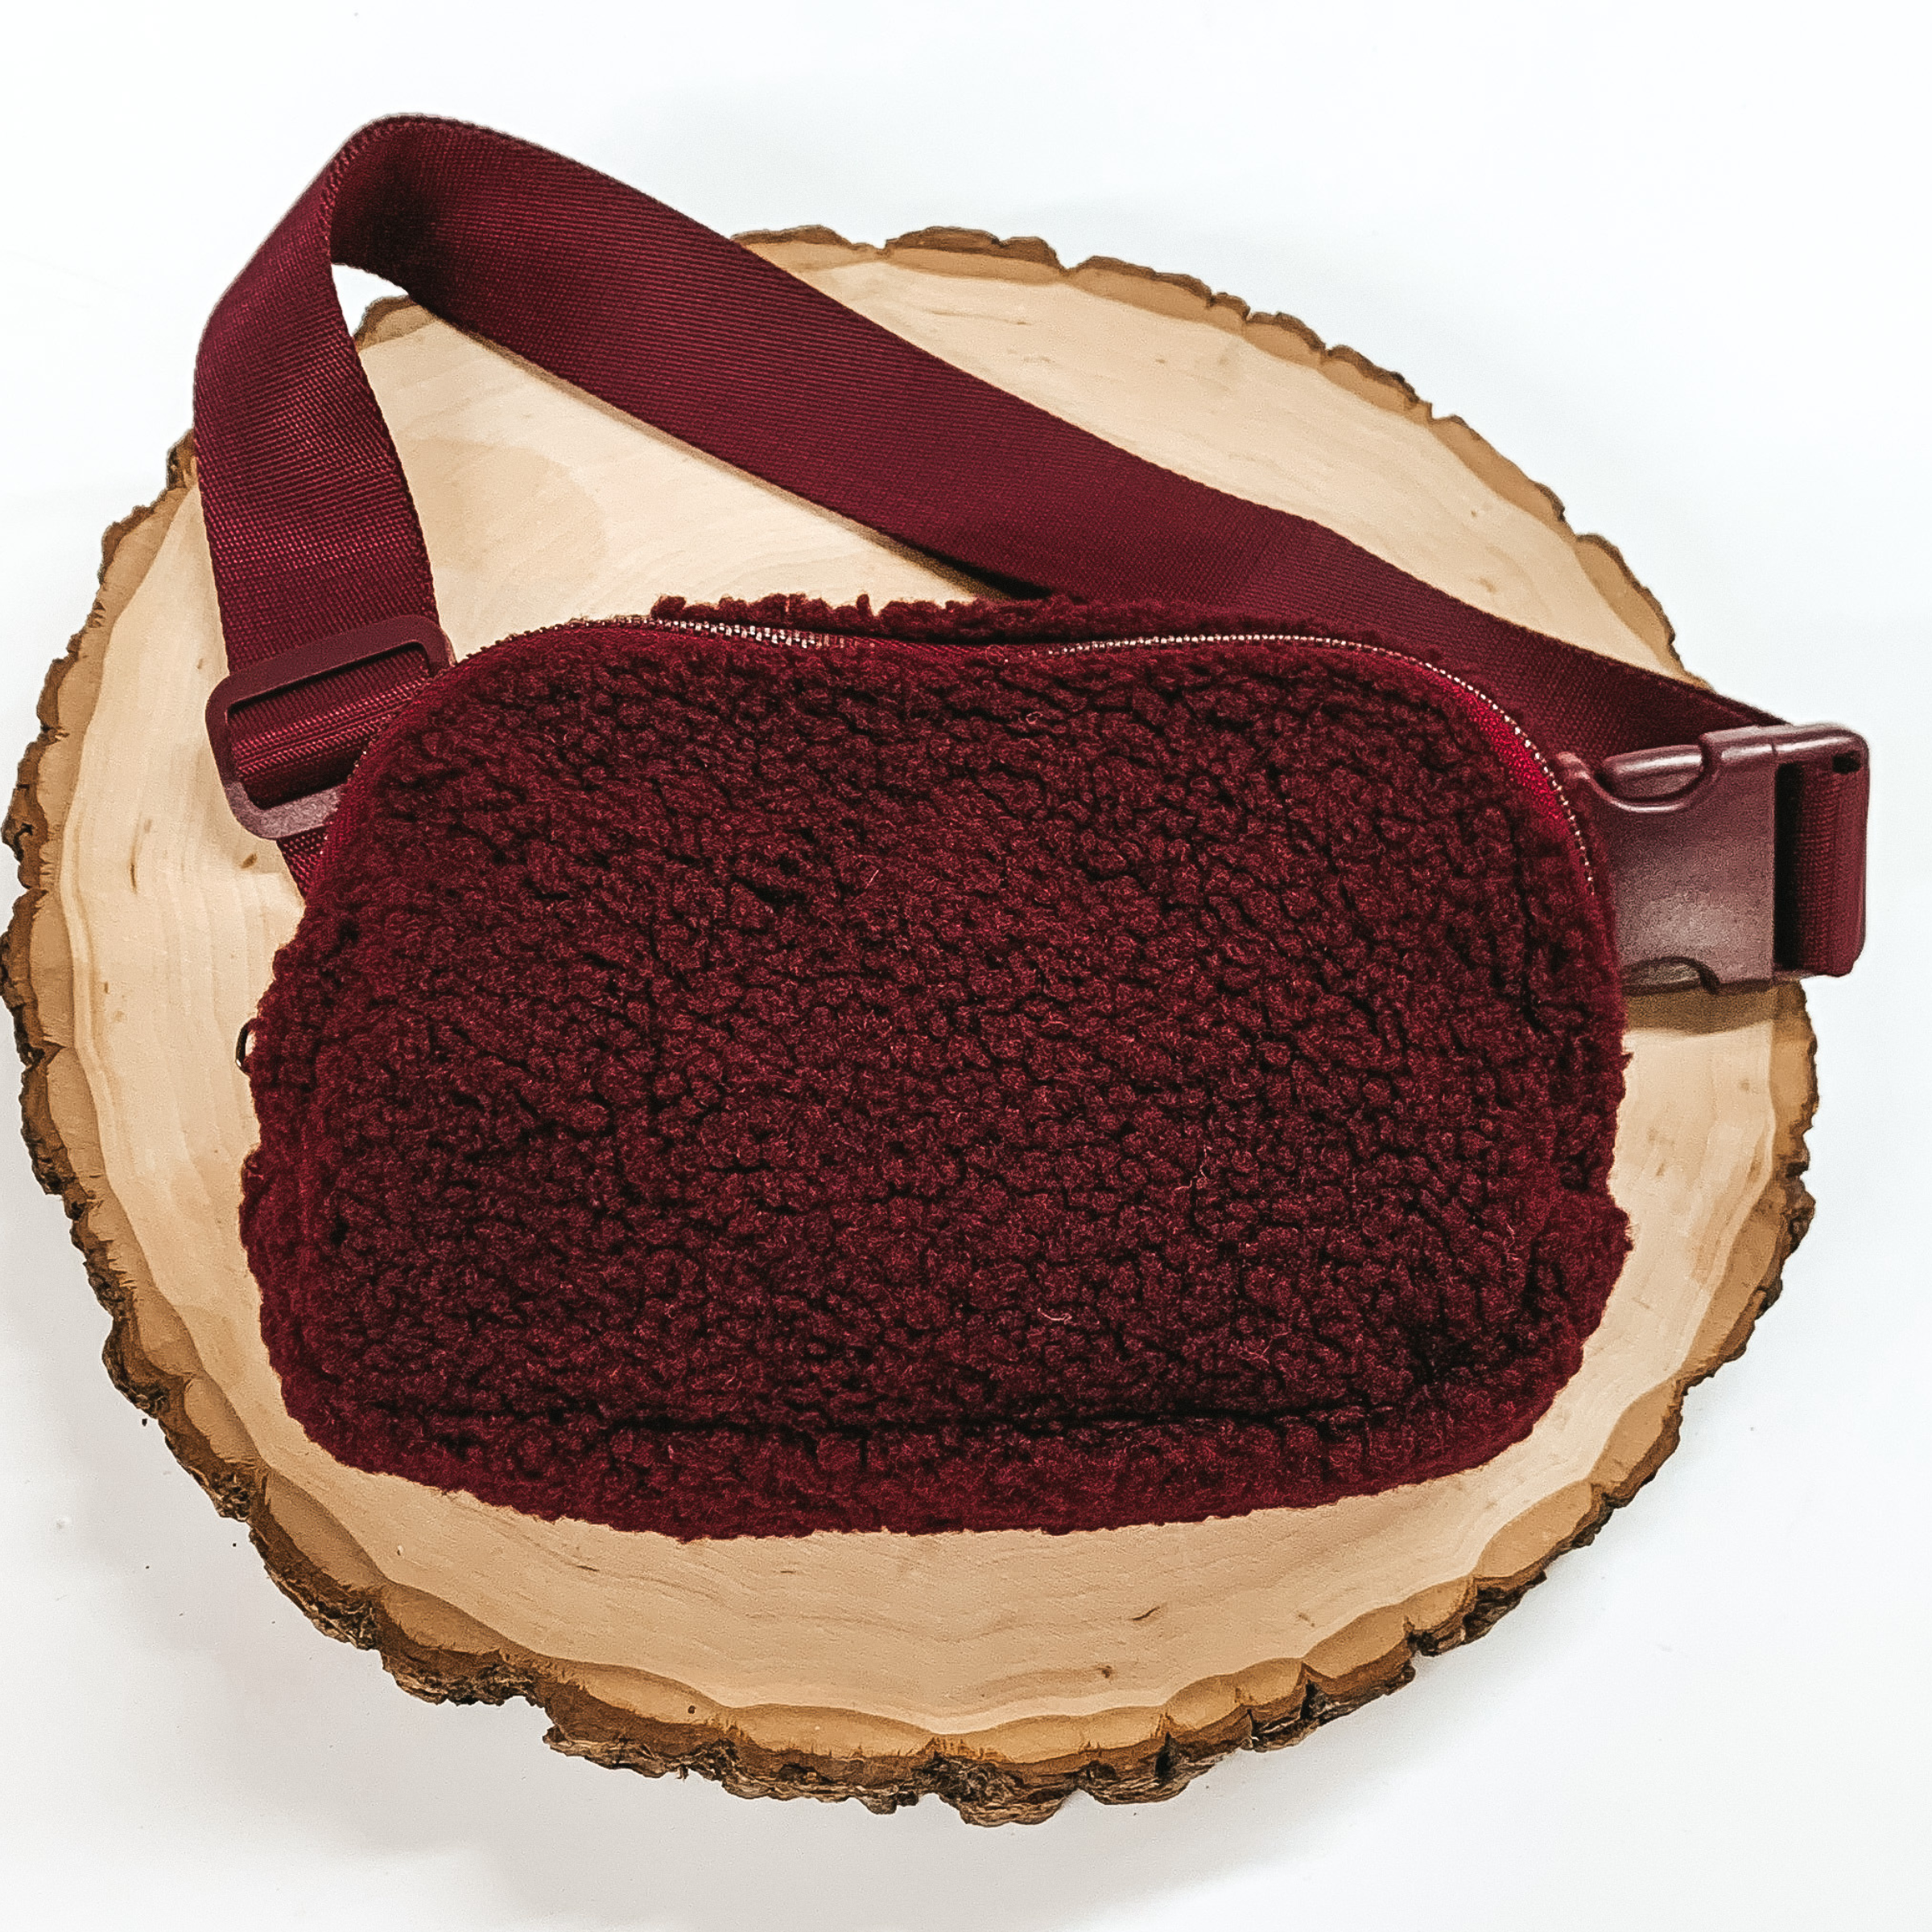 Maroon, sherpa fanny pack with a top zipper across the front. This fanny pack also includes maroon straps and maroon clips. This fanny pack is pictured on a piece of wood on a white background.